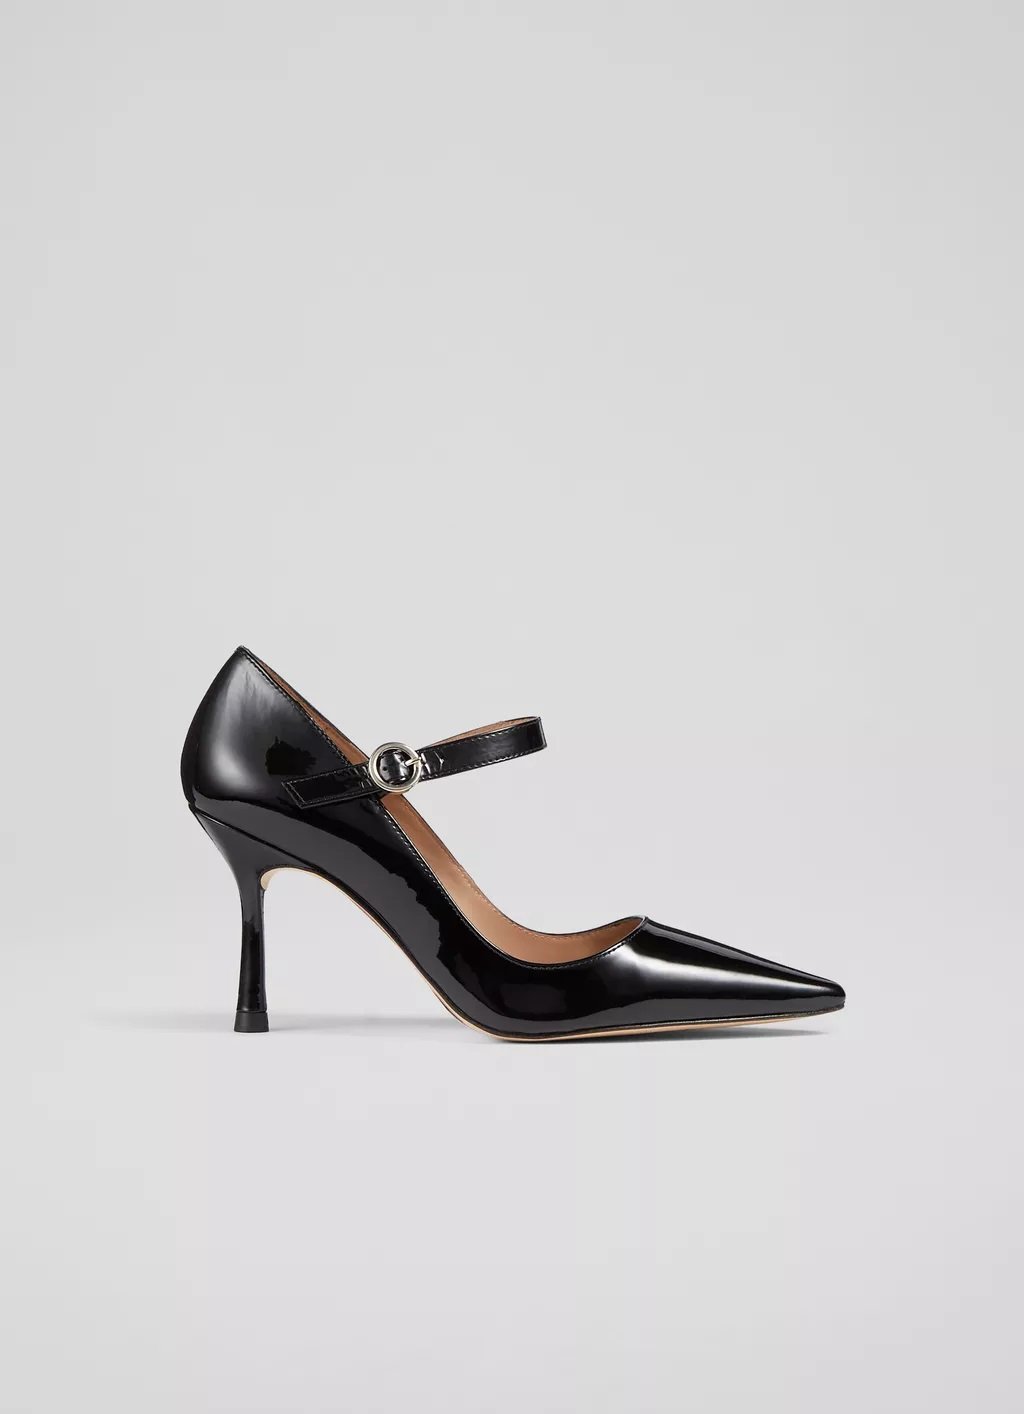 L.K. Bennett Camille Mary-Jane Courts in Black Patent Leather.jpg